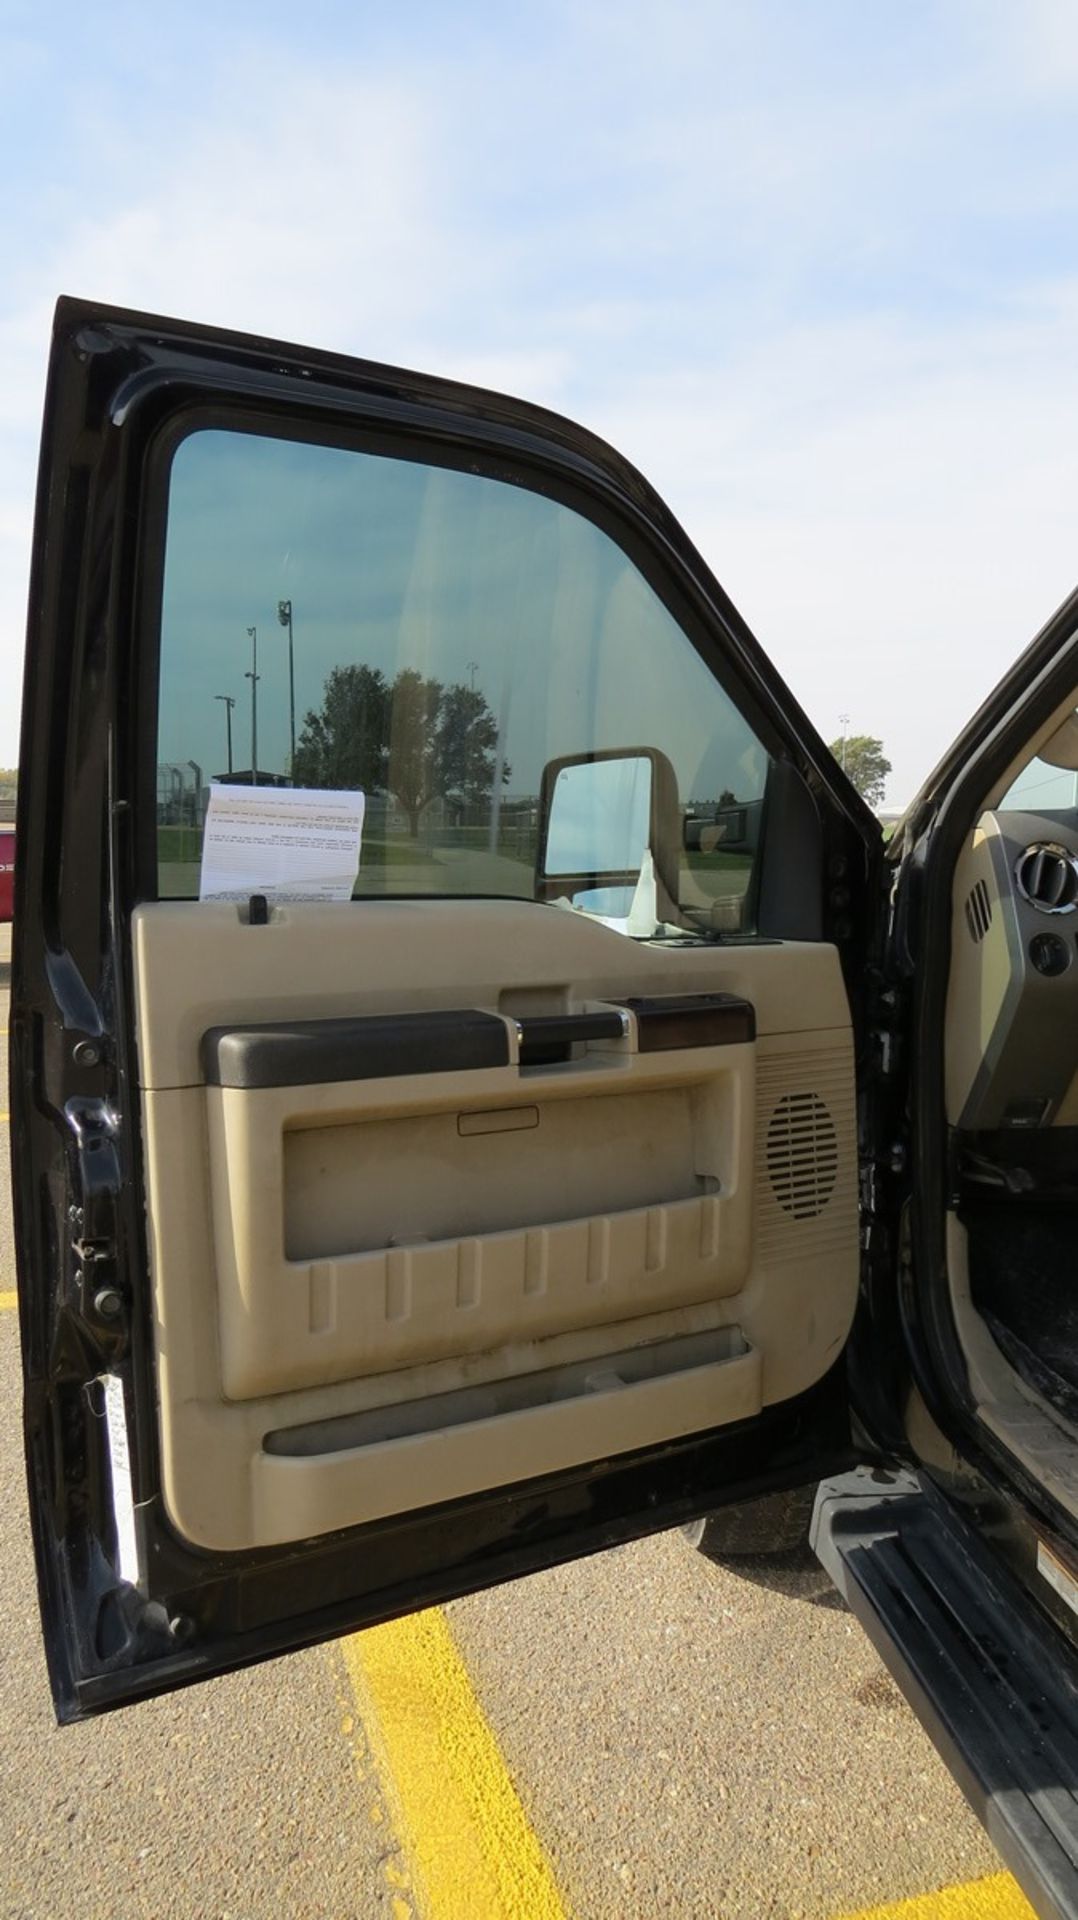 2008 Ford Model F-550 Lariat Extended Cab 4x4 Diesel 1-Ton Dually Pickup, VIN# ED26416, 6.4 Liter - Image 29 of 43